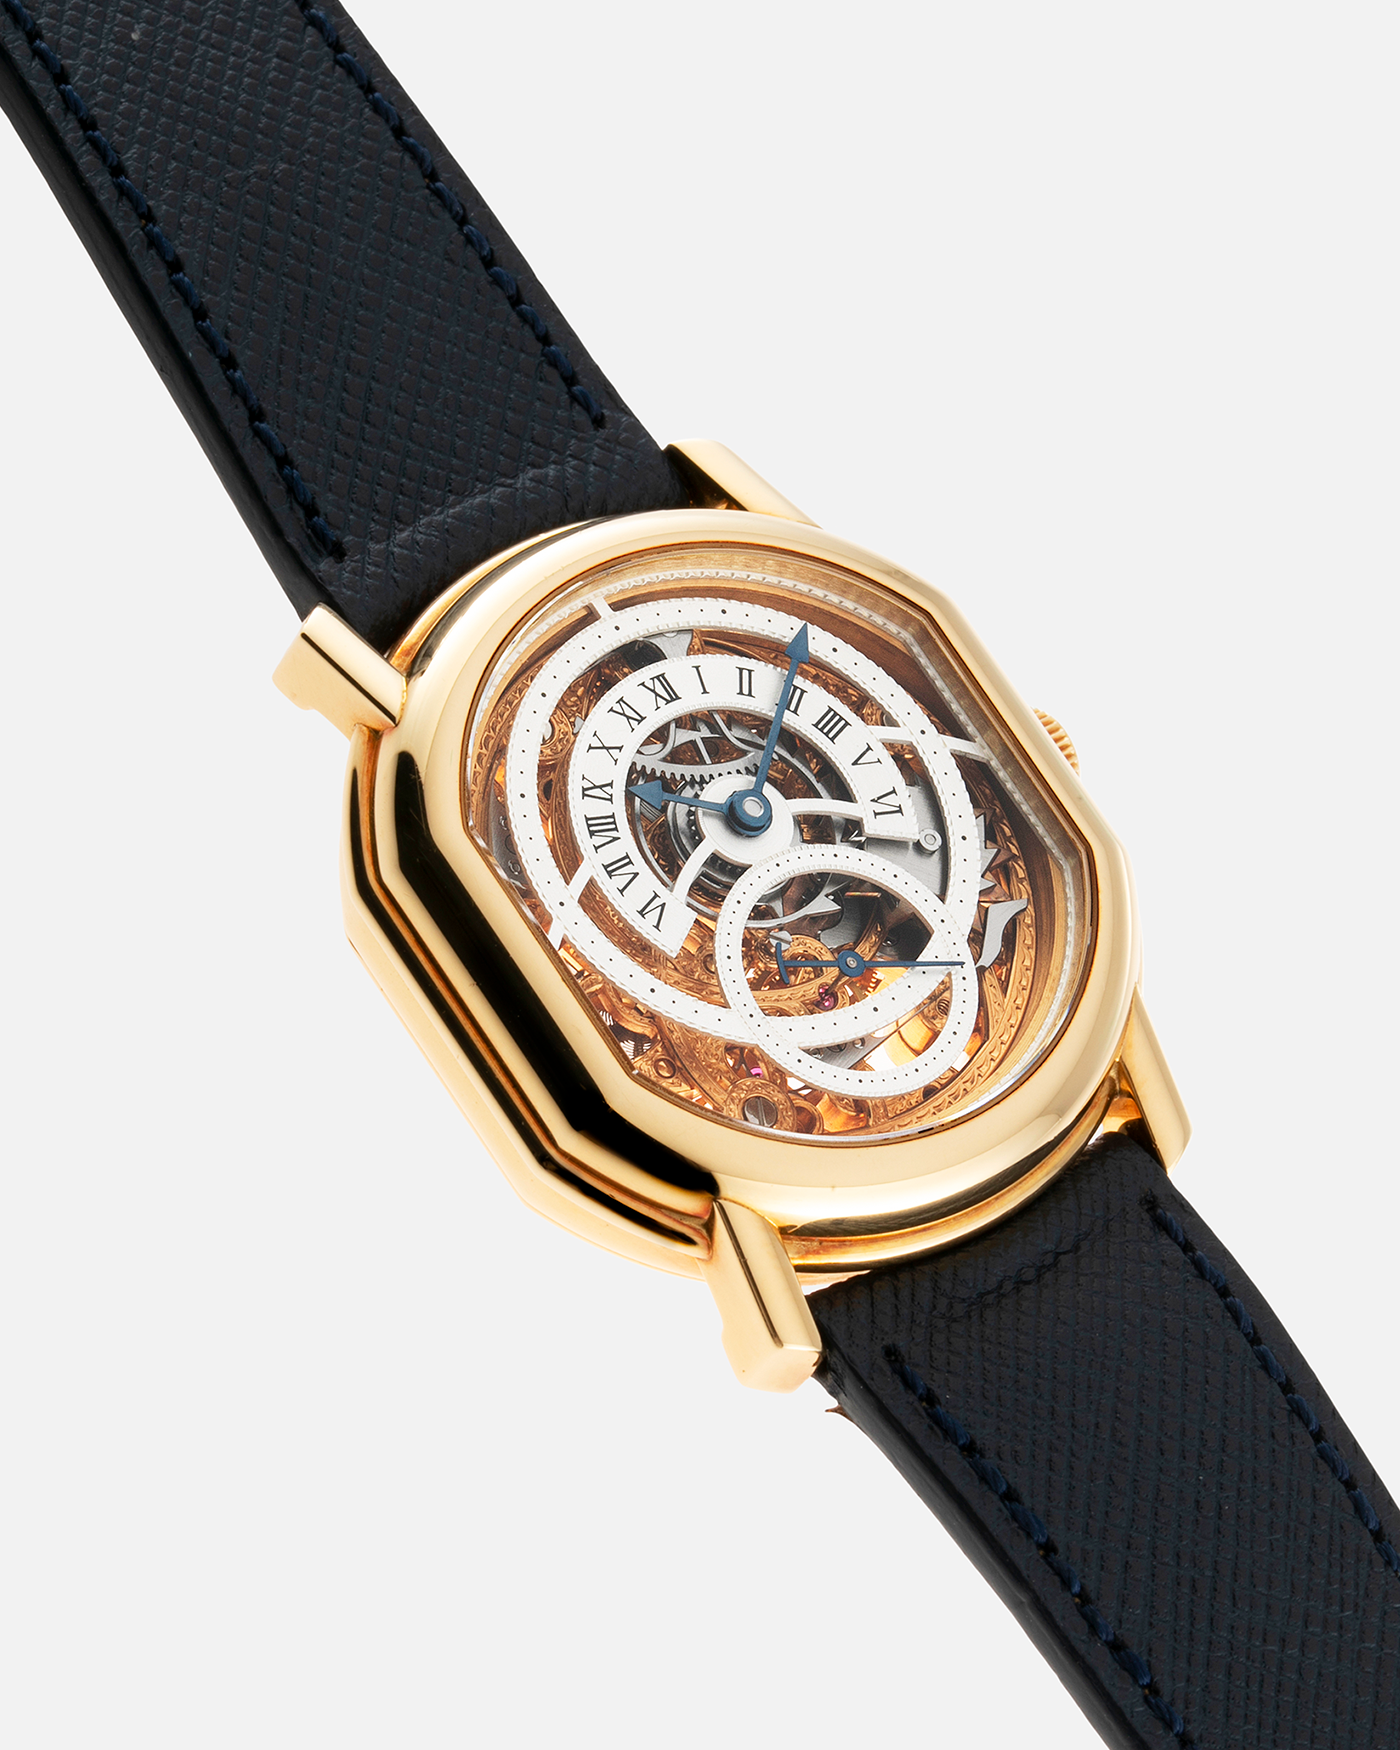 Brand: Daniel Roth Year: 1990’s Model: 2127 Skeleton Material: 18k Yellow Gold Movement: Lemania 27LN with Retrograde Function Case Diameter: 35mm X 38mm Strap: Molequin Navy Blue Textured Calf Strap and 18k Yellow Gold Daniel Roth Tang Buckle